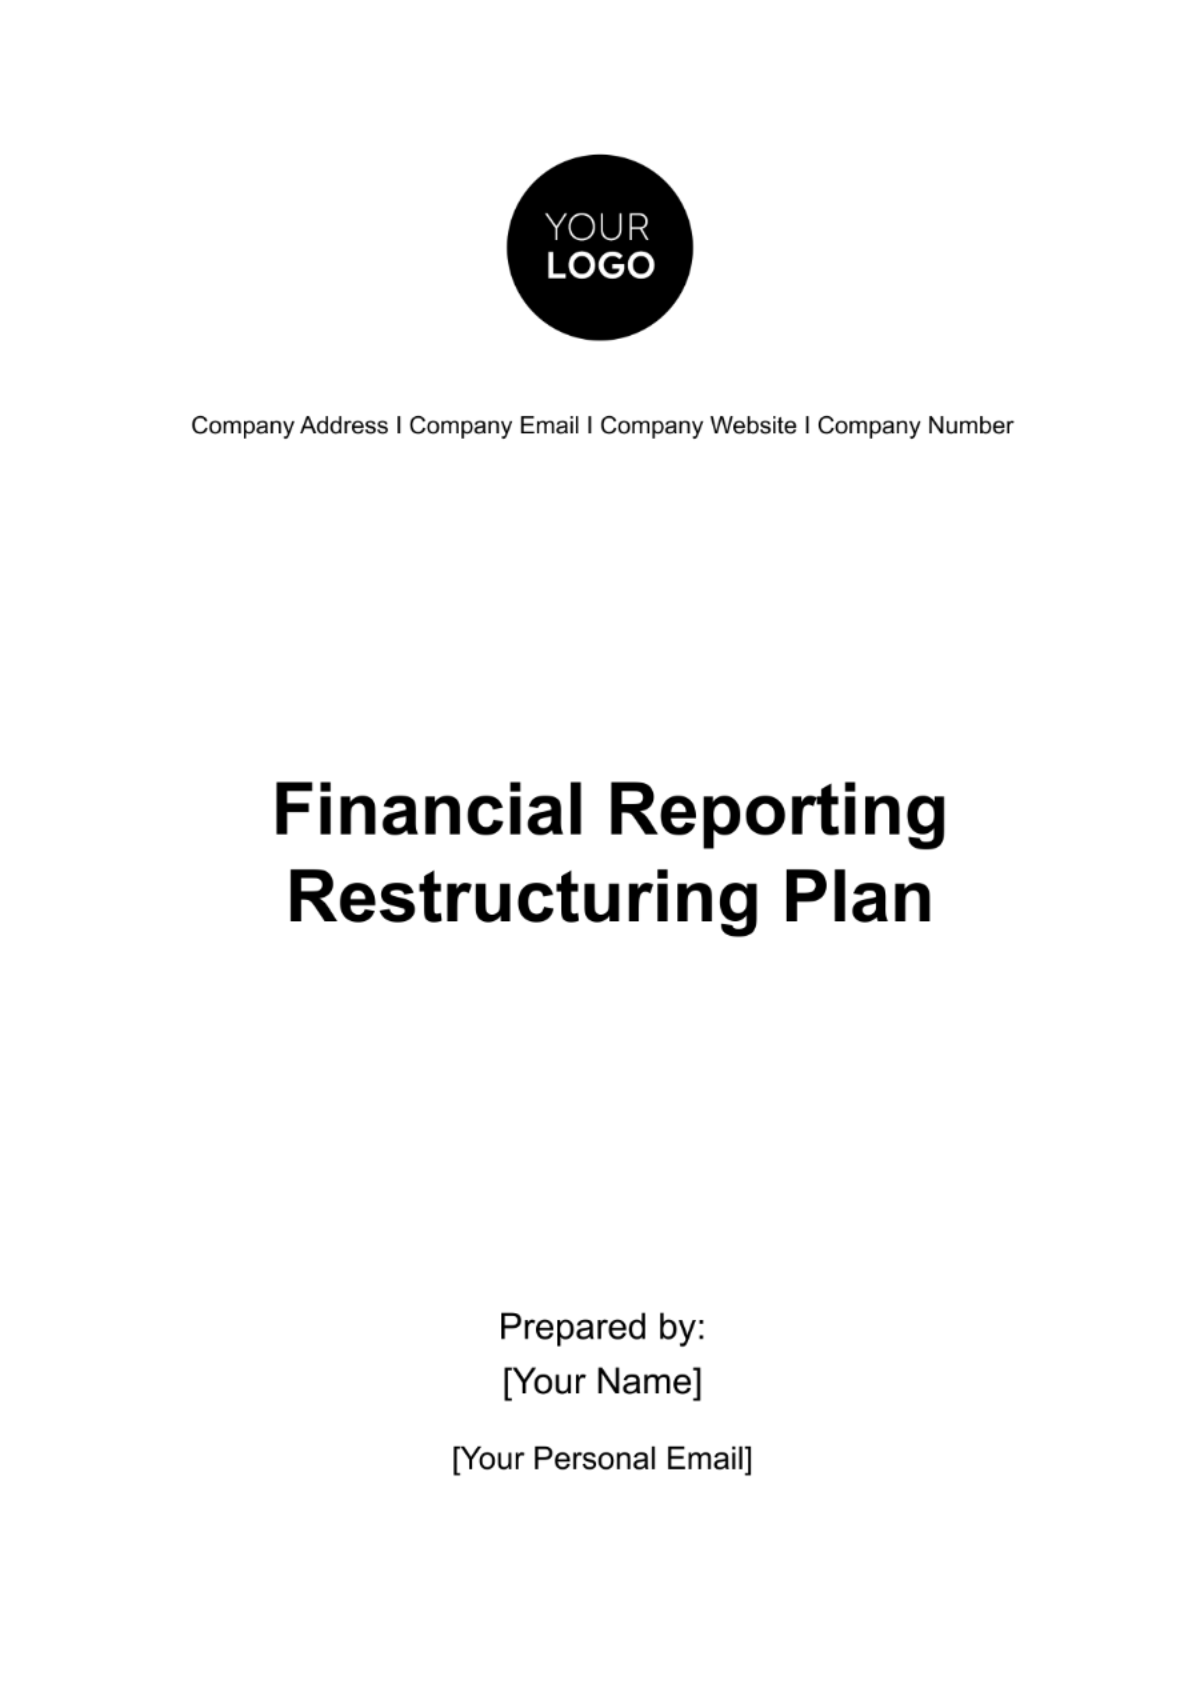 Financial Reporting Restructuring Plan Template